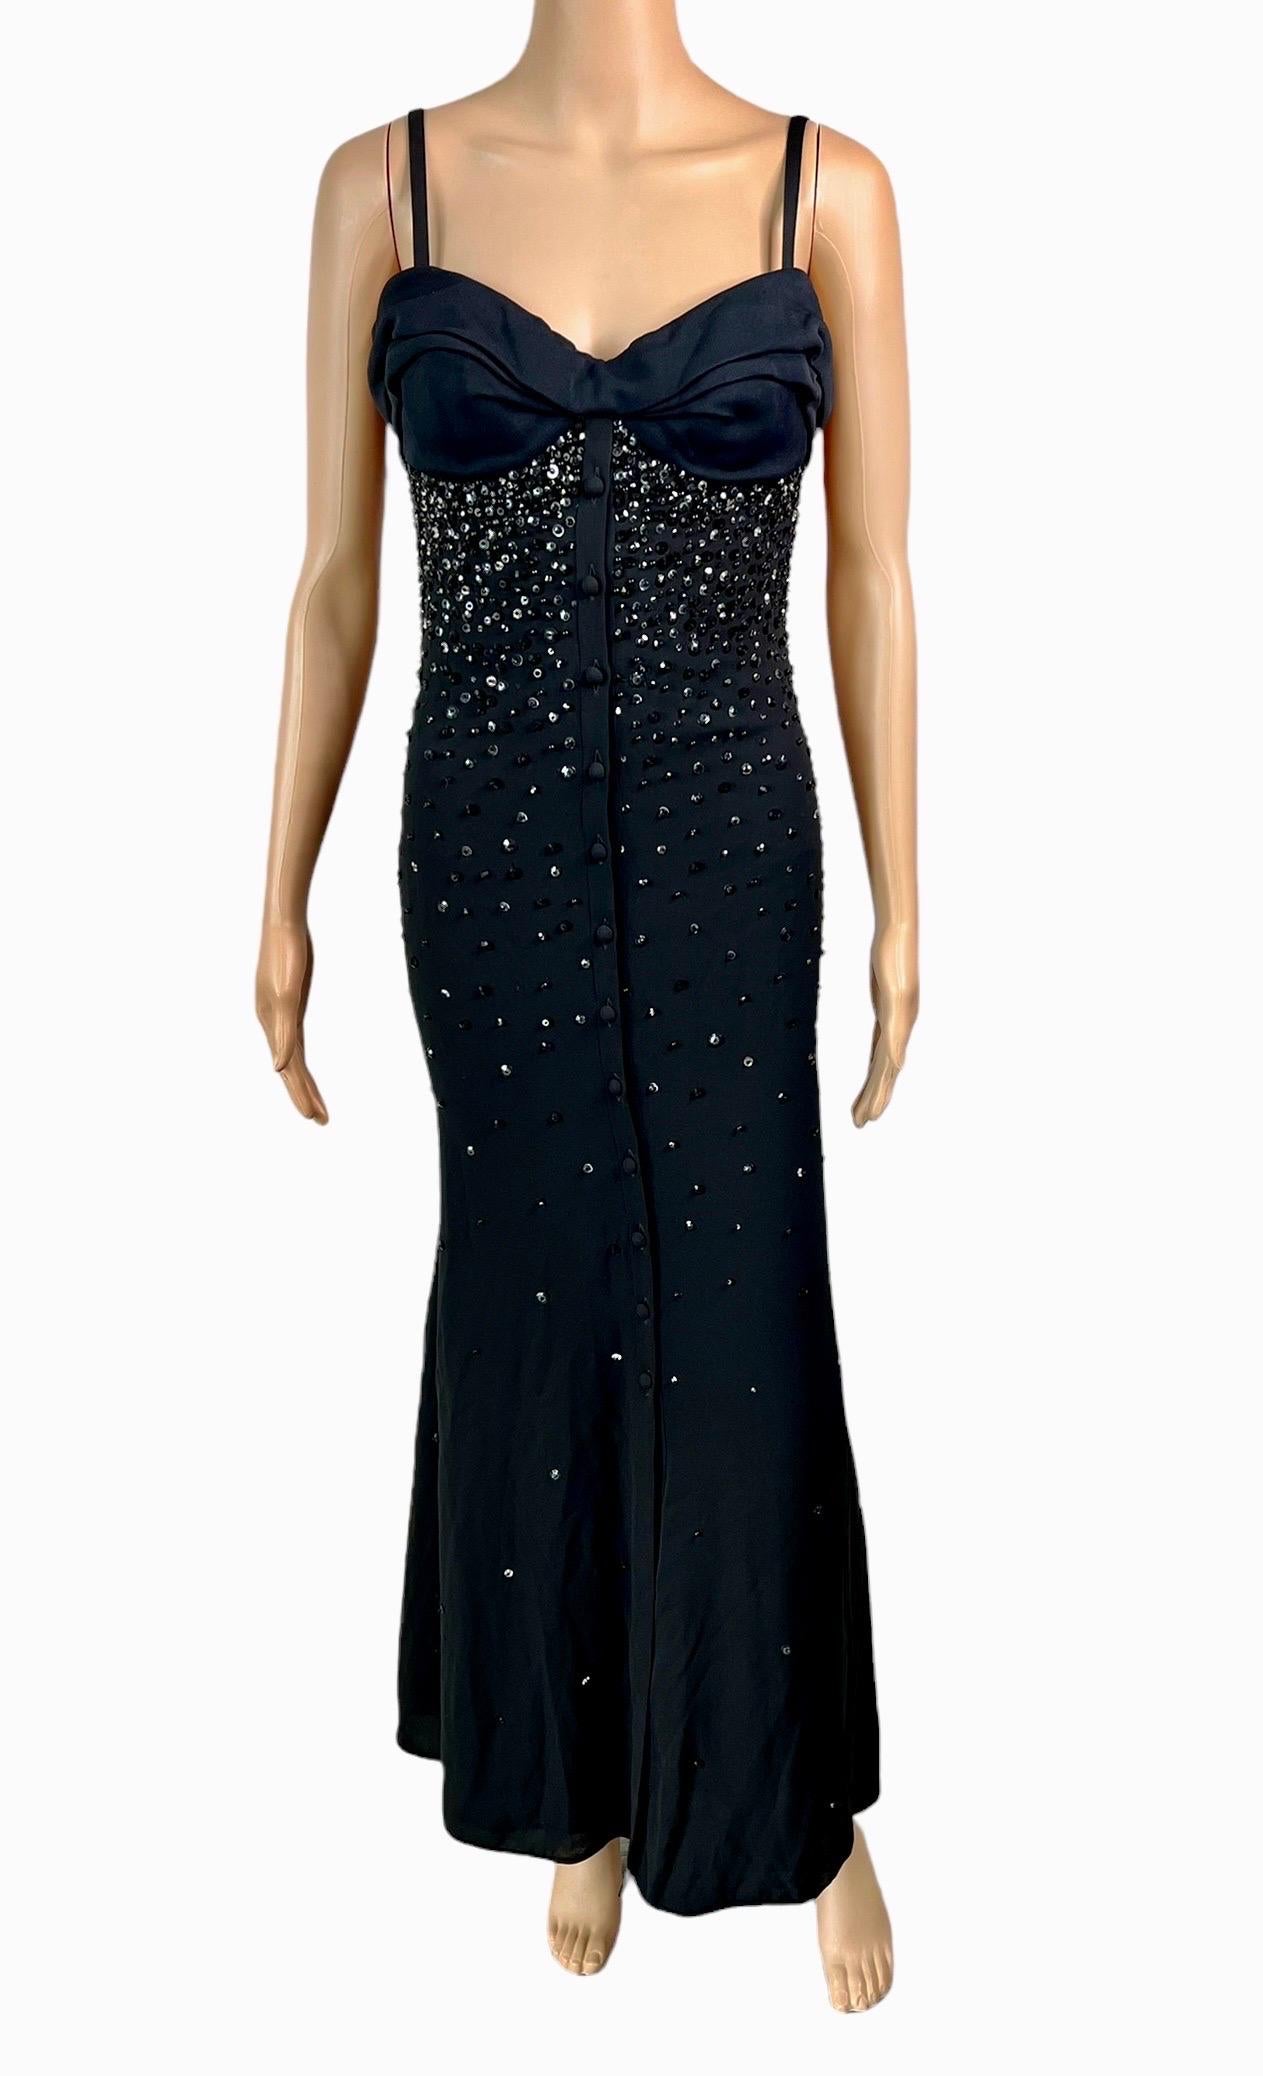 Gianni Versace S/S 1996 Runway Embellished Bustier Black Evening Dress Gown  For Sale 5